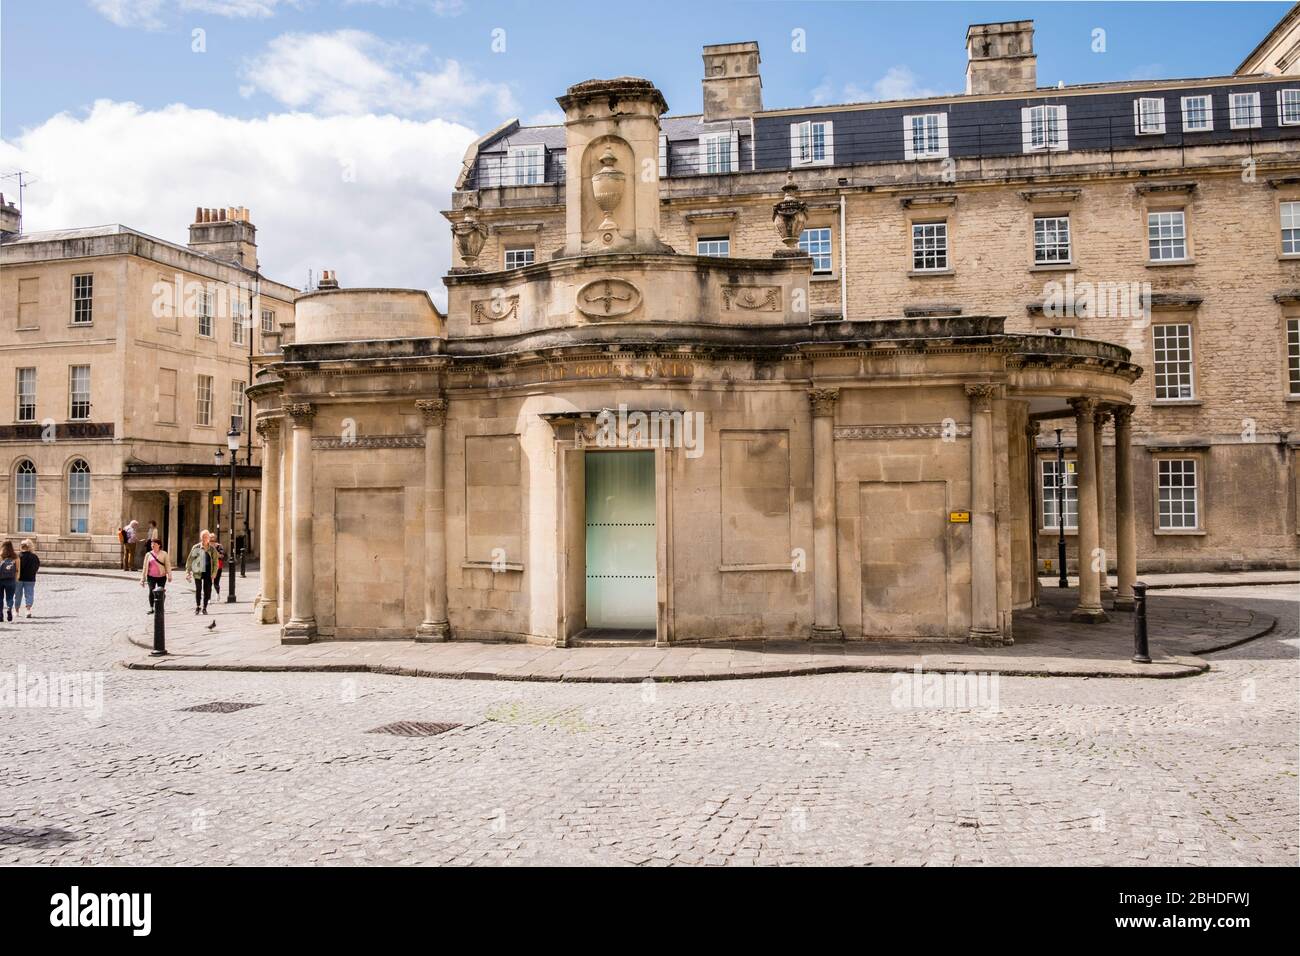 The Cross Bath, Thermae Bath Spa, Bath, Somerset, Angleterre, GB, Royaume-Uni Banque D'Images